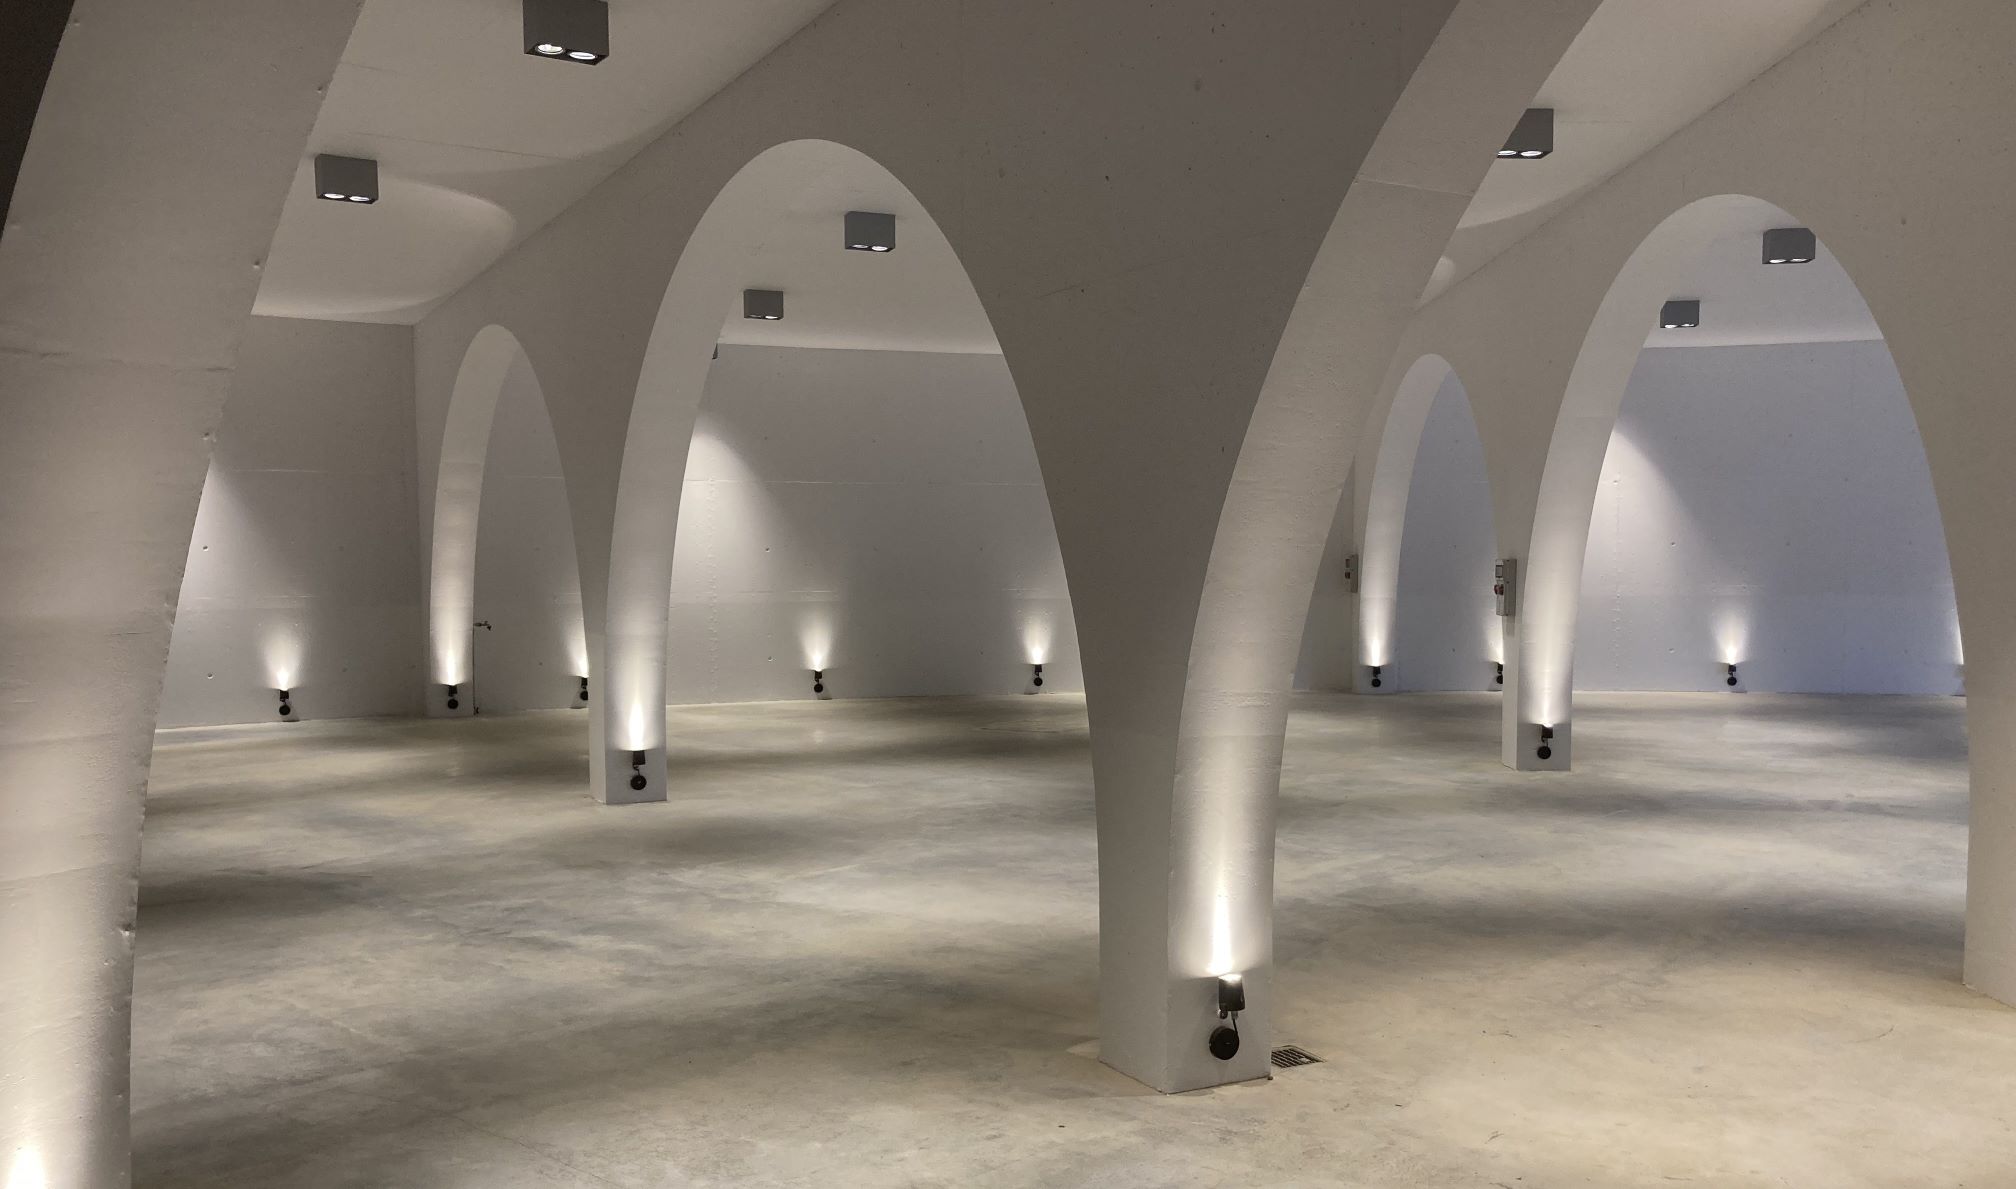 The new vaults are stunning, and with amazing acoustics